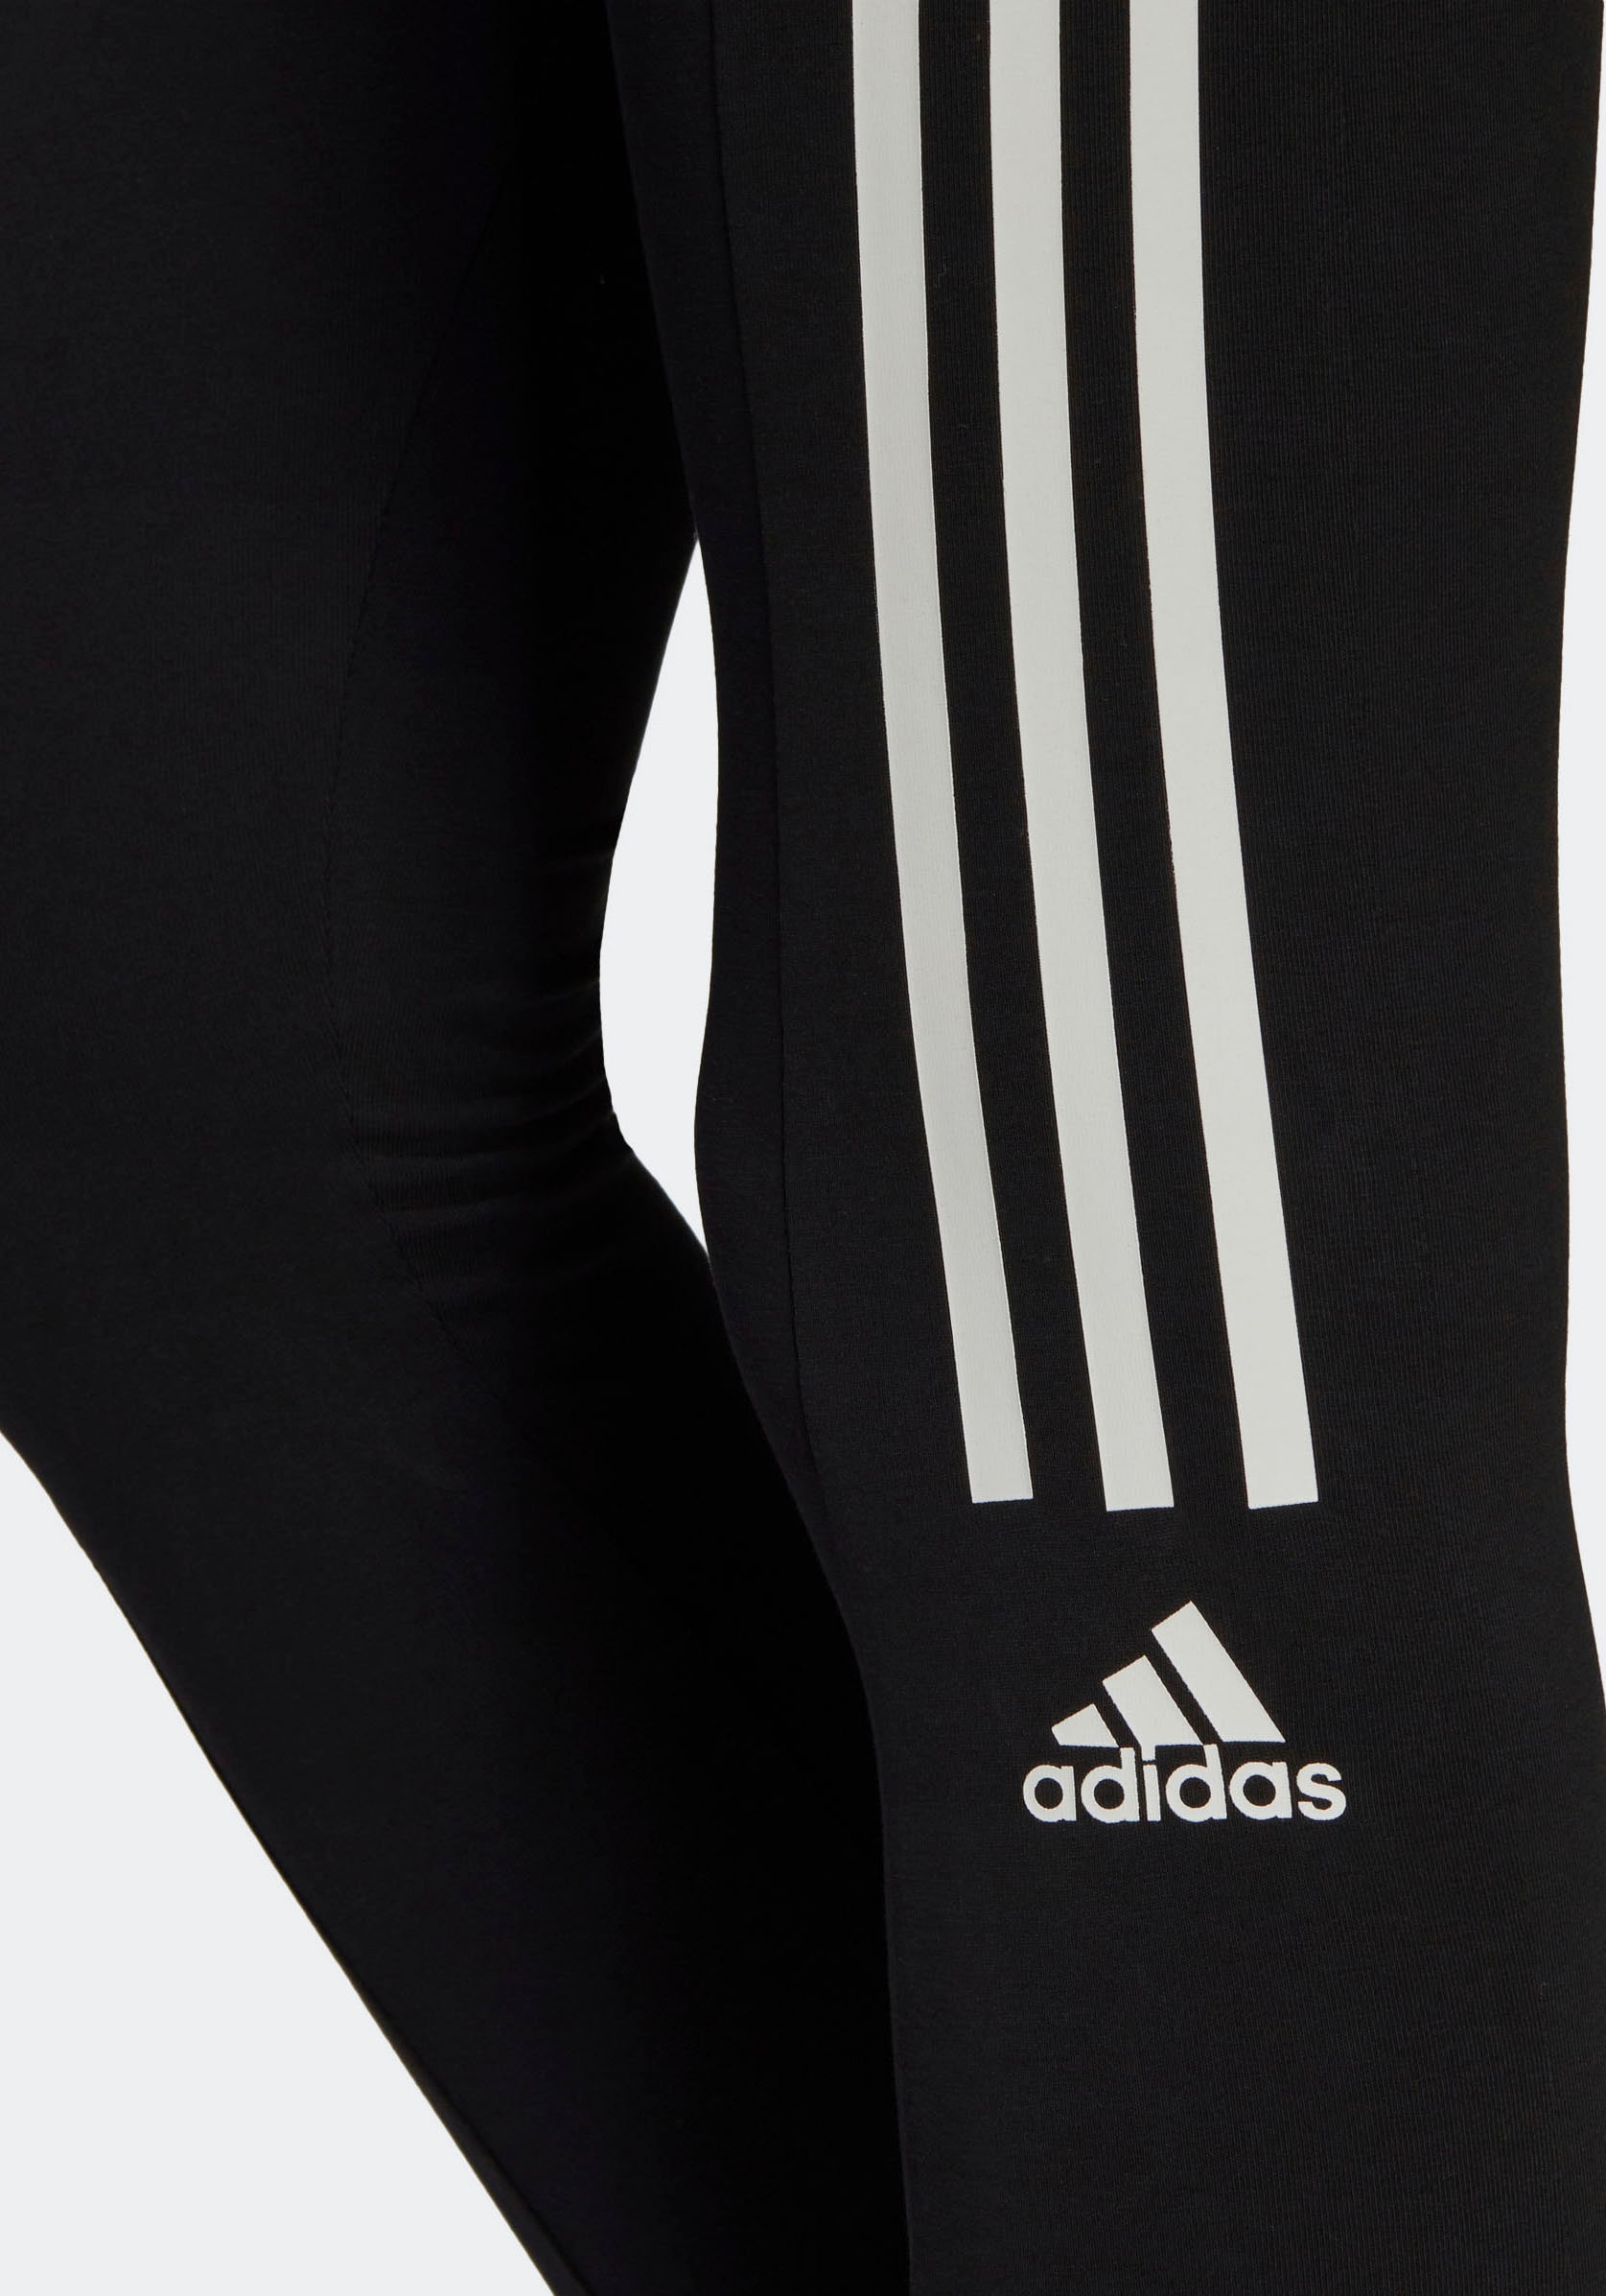 adidas Performance Trainingstights »AEROREADY DESIGNED TO MOVE COTTON-TOUCH 7/8-TIGHT«, (1 tlg.)